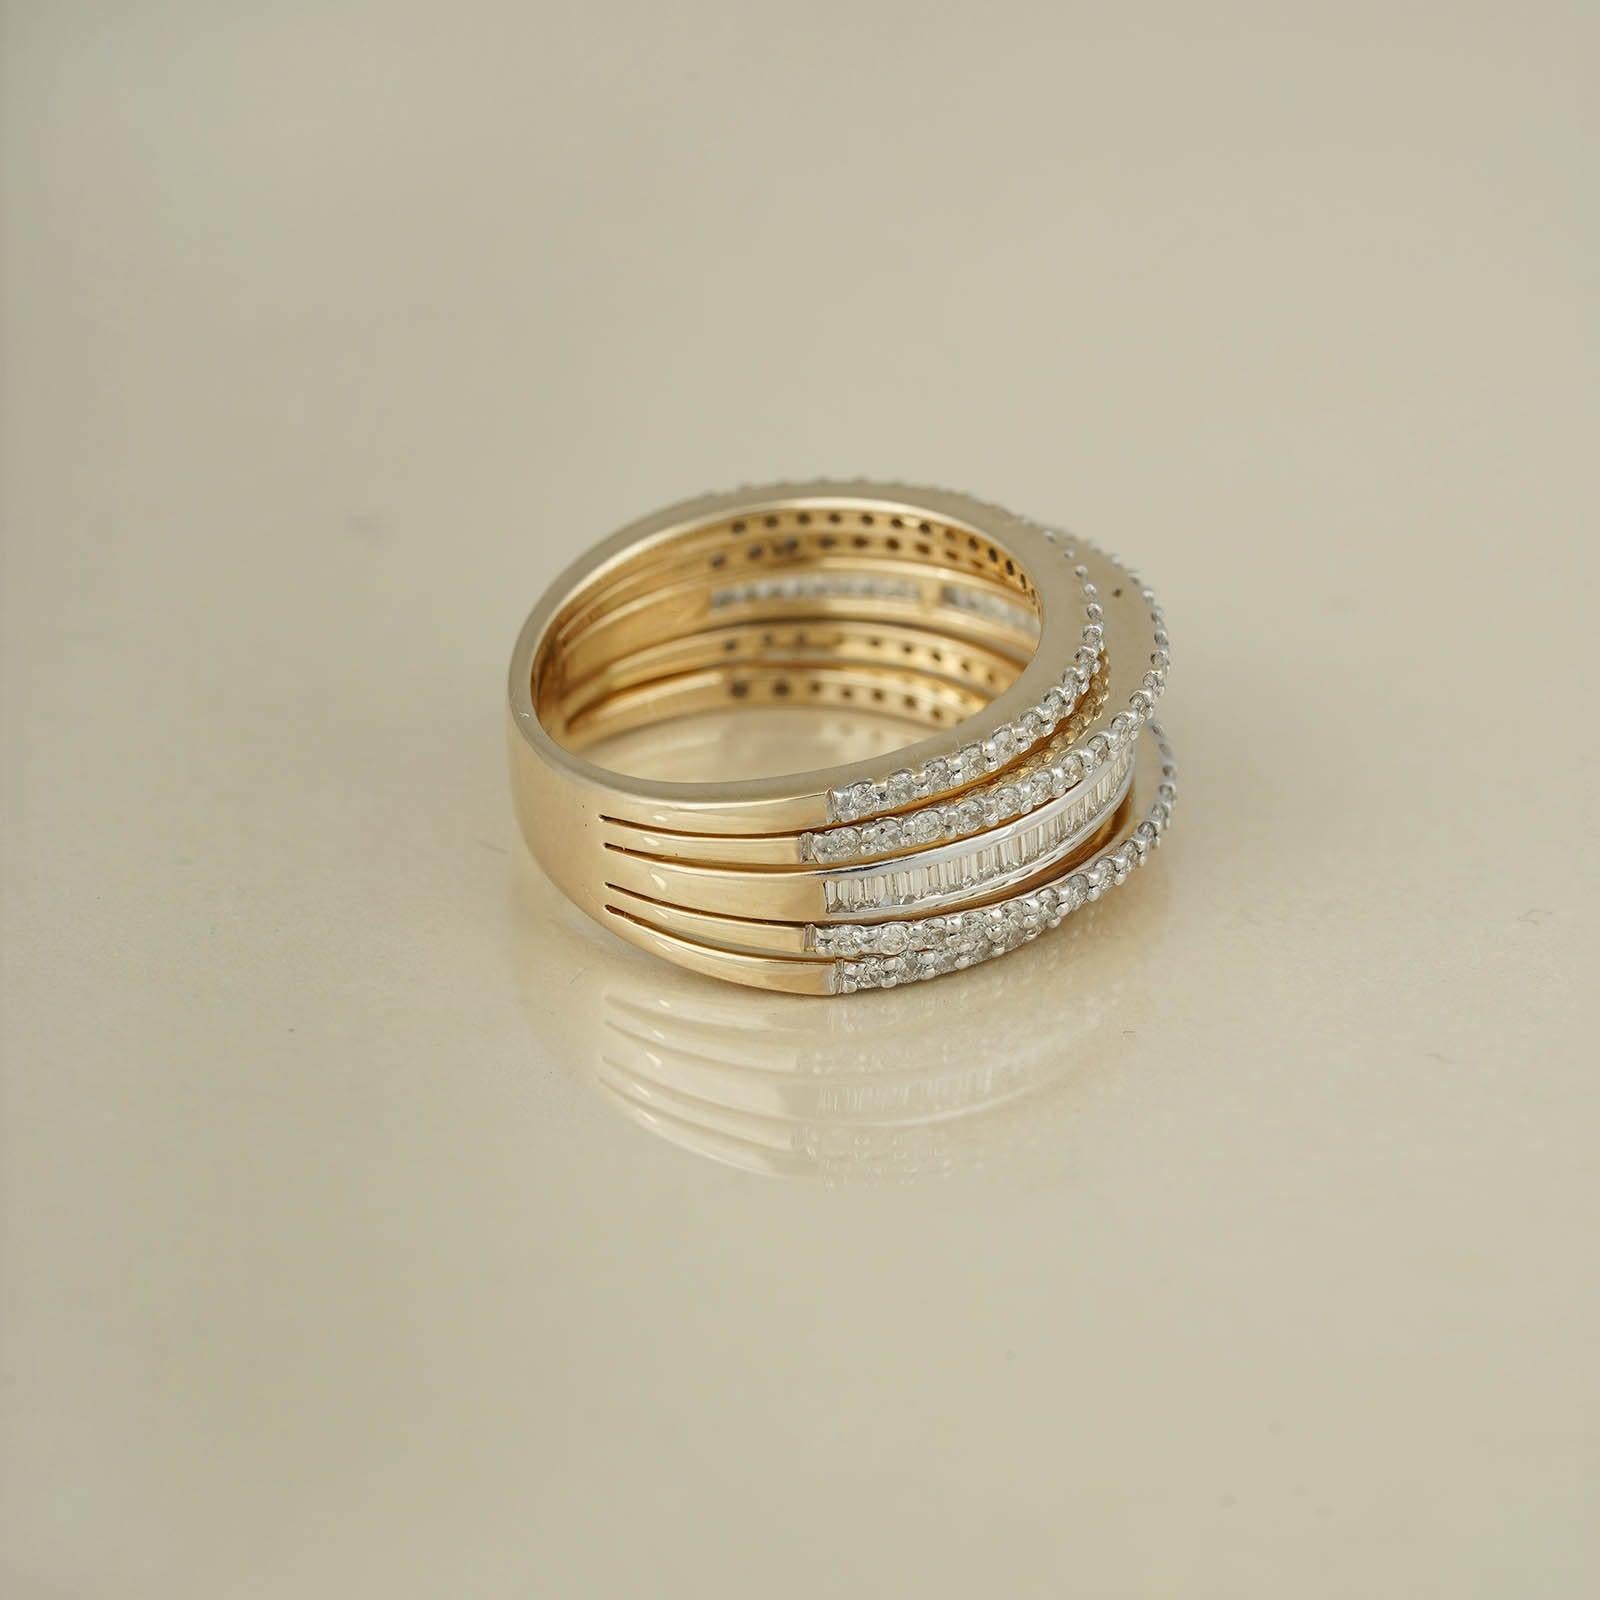 For Sale:  Moi Bridget gold and diamond ring 5